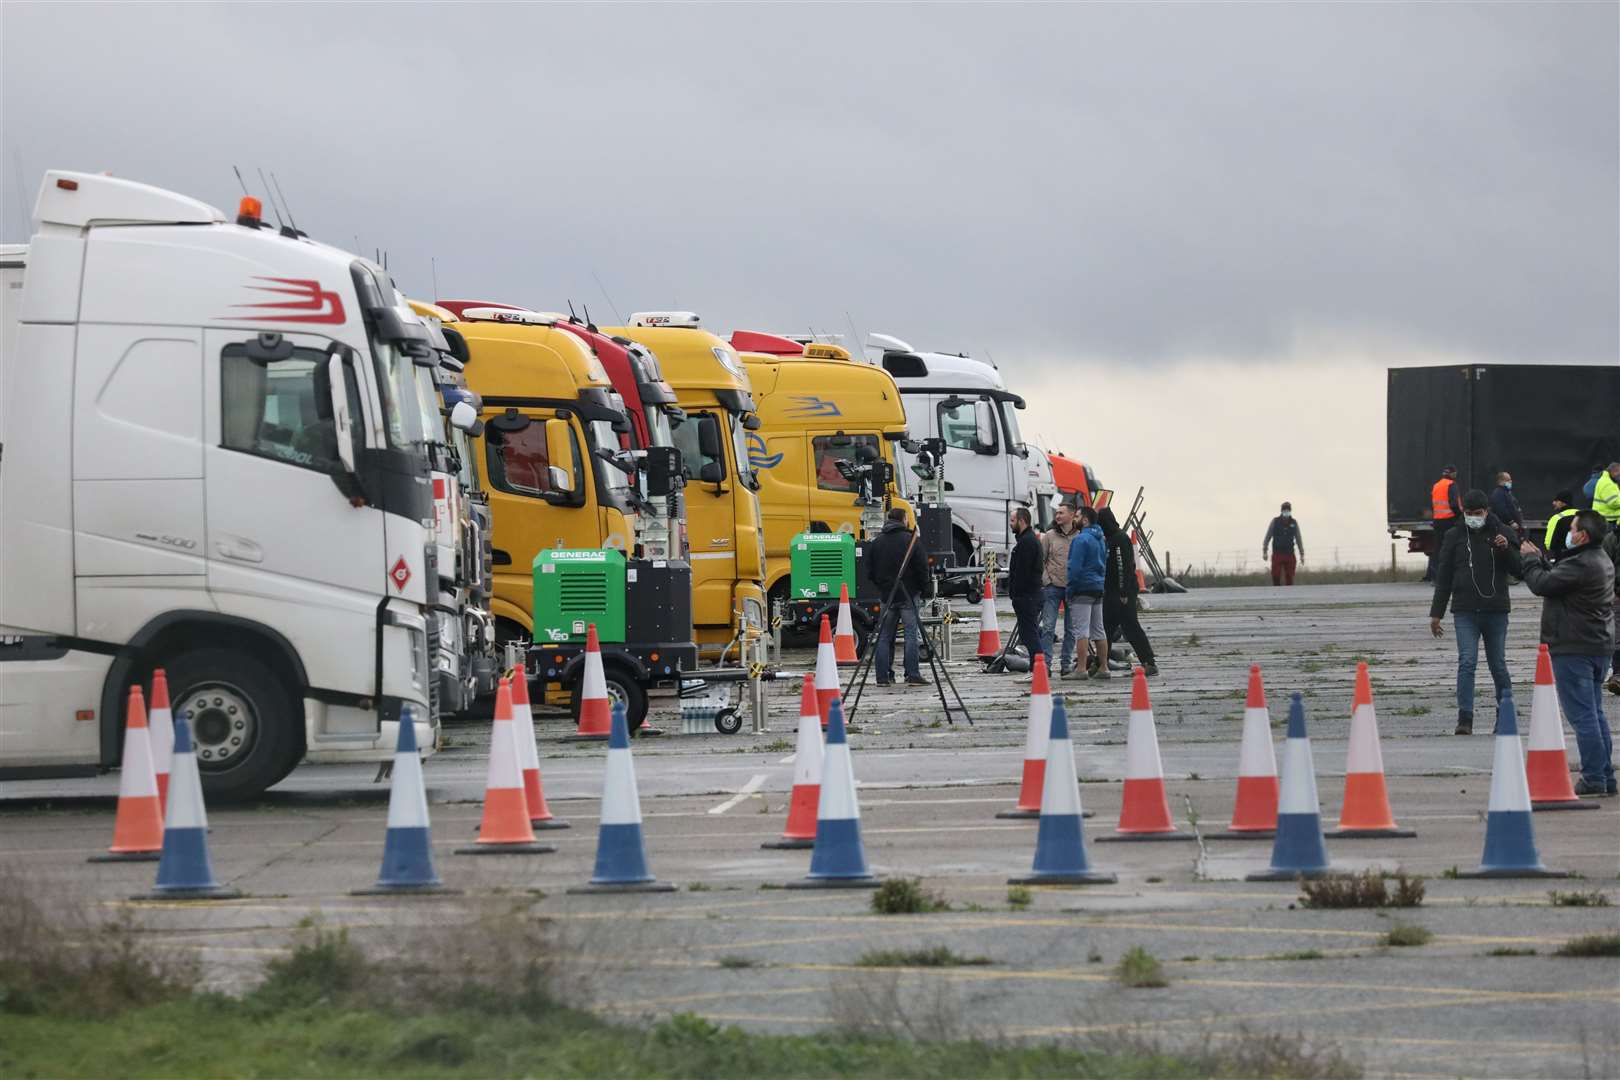 Lorries have now been cleared out of Manston Airport Picture: UKNIP